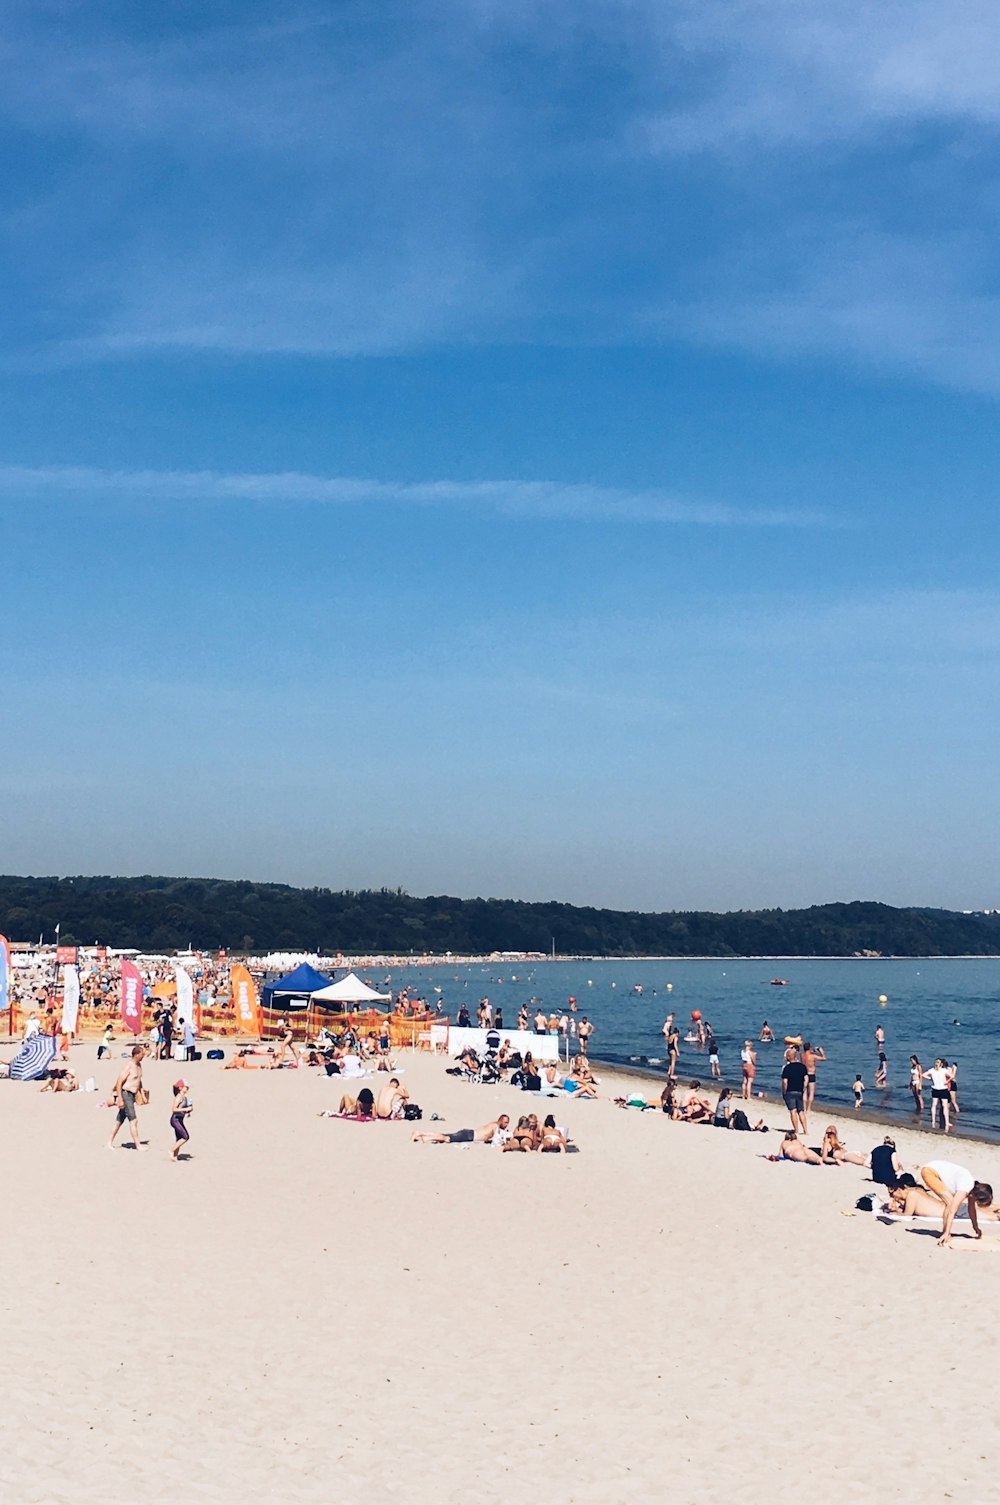 a crowded beach with people and umbrellas on a sunny day